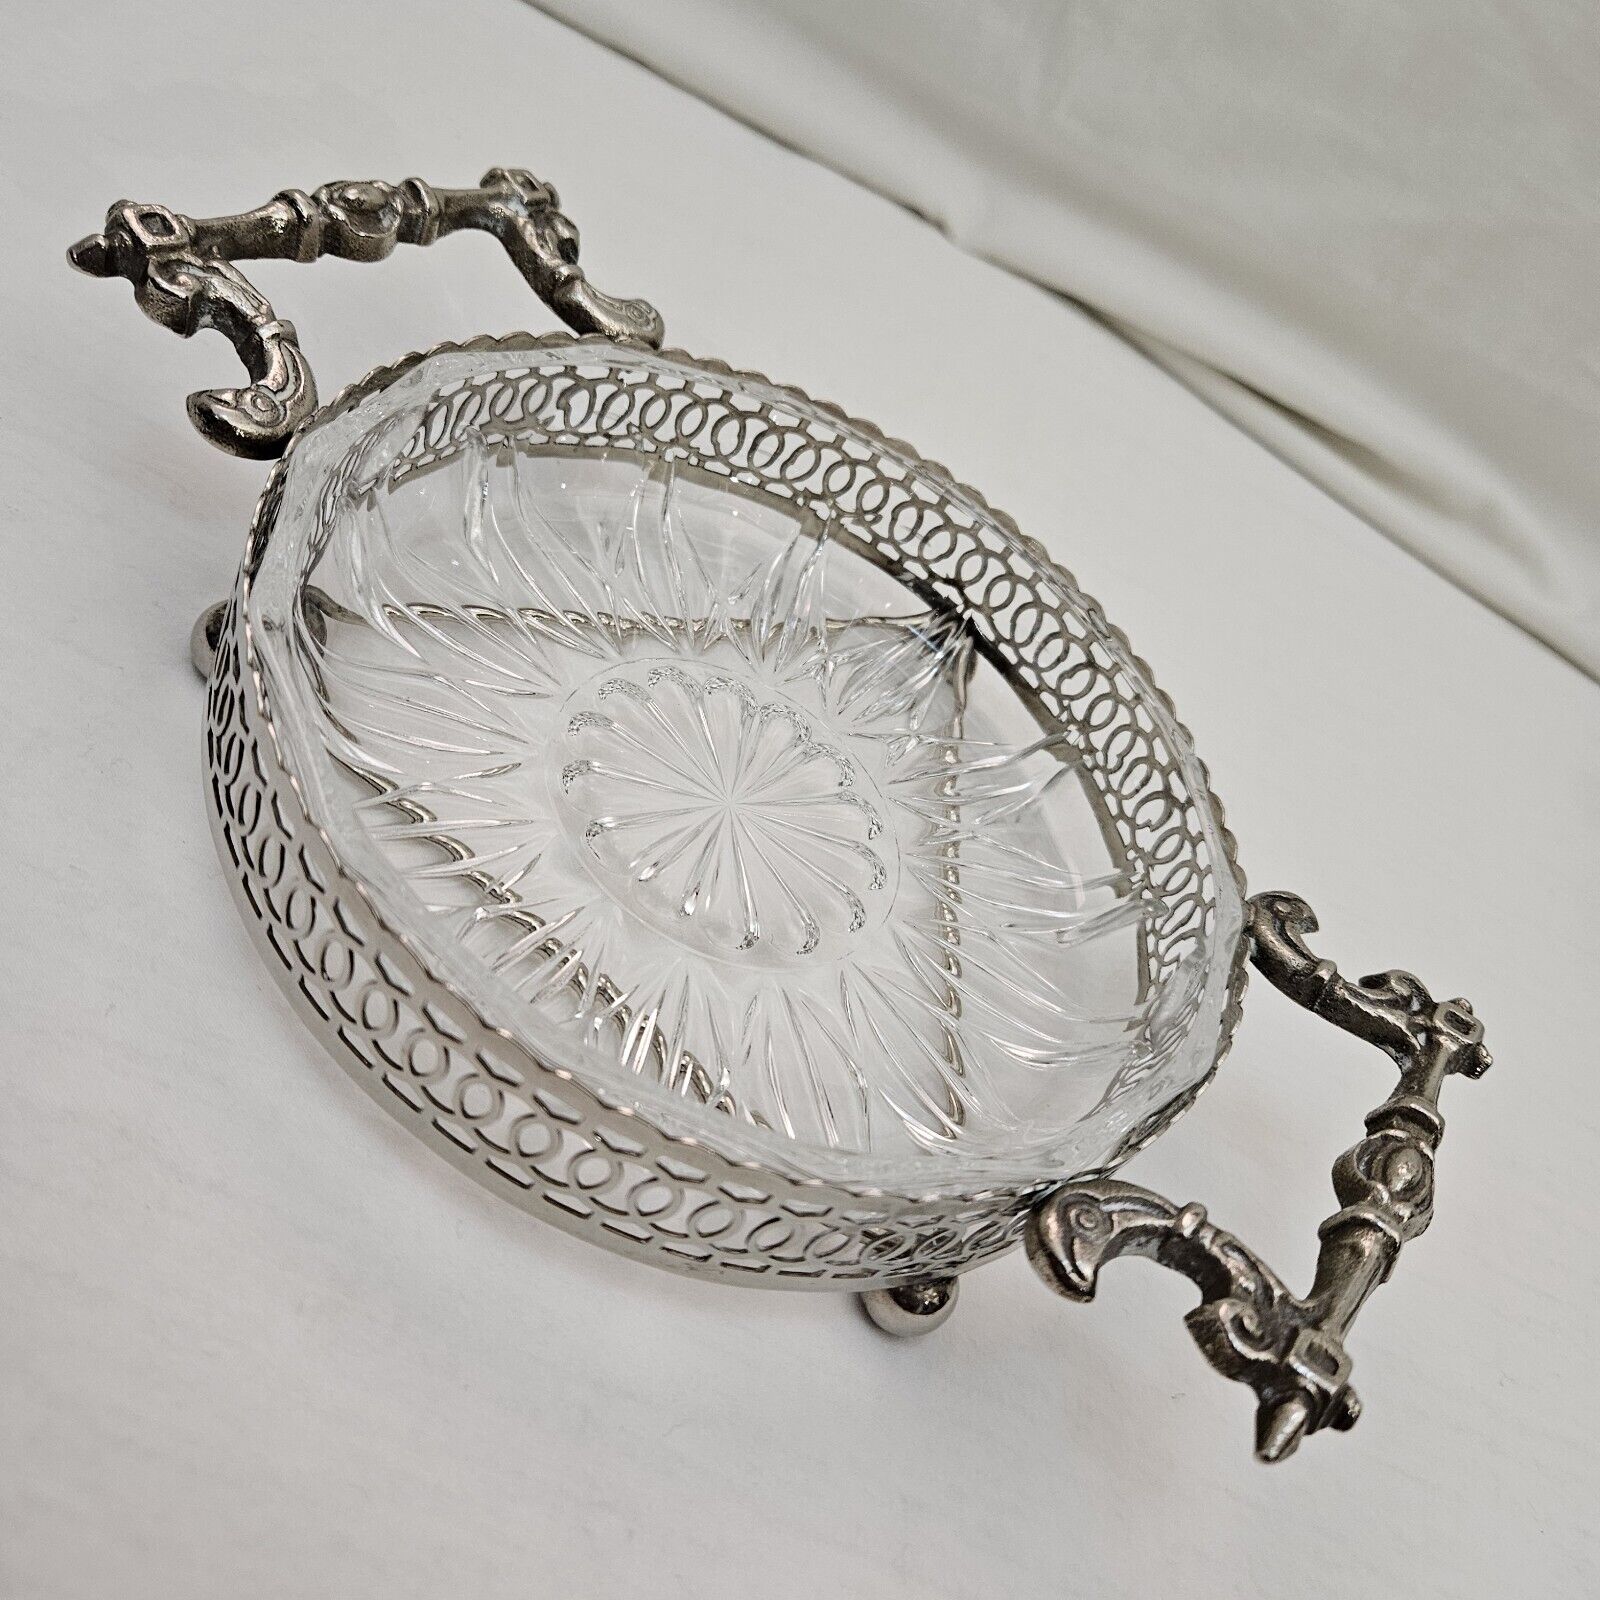 Vintage Silverplate Holder with Divided Glass Candy Dish Made In England